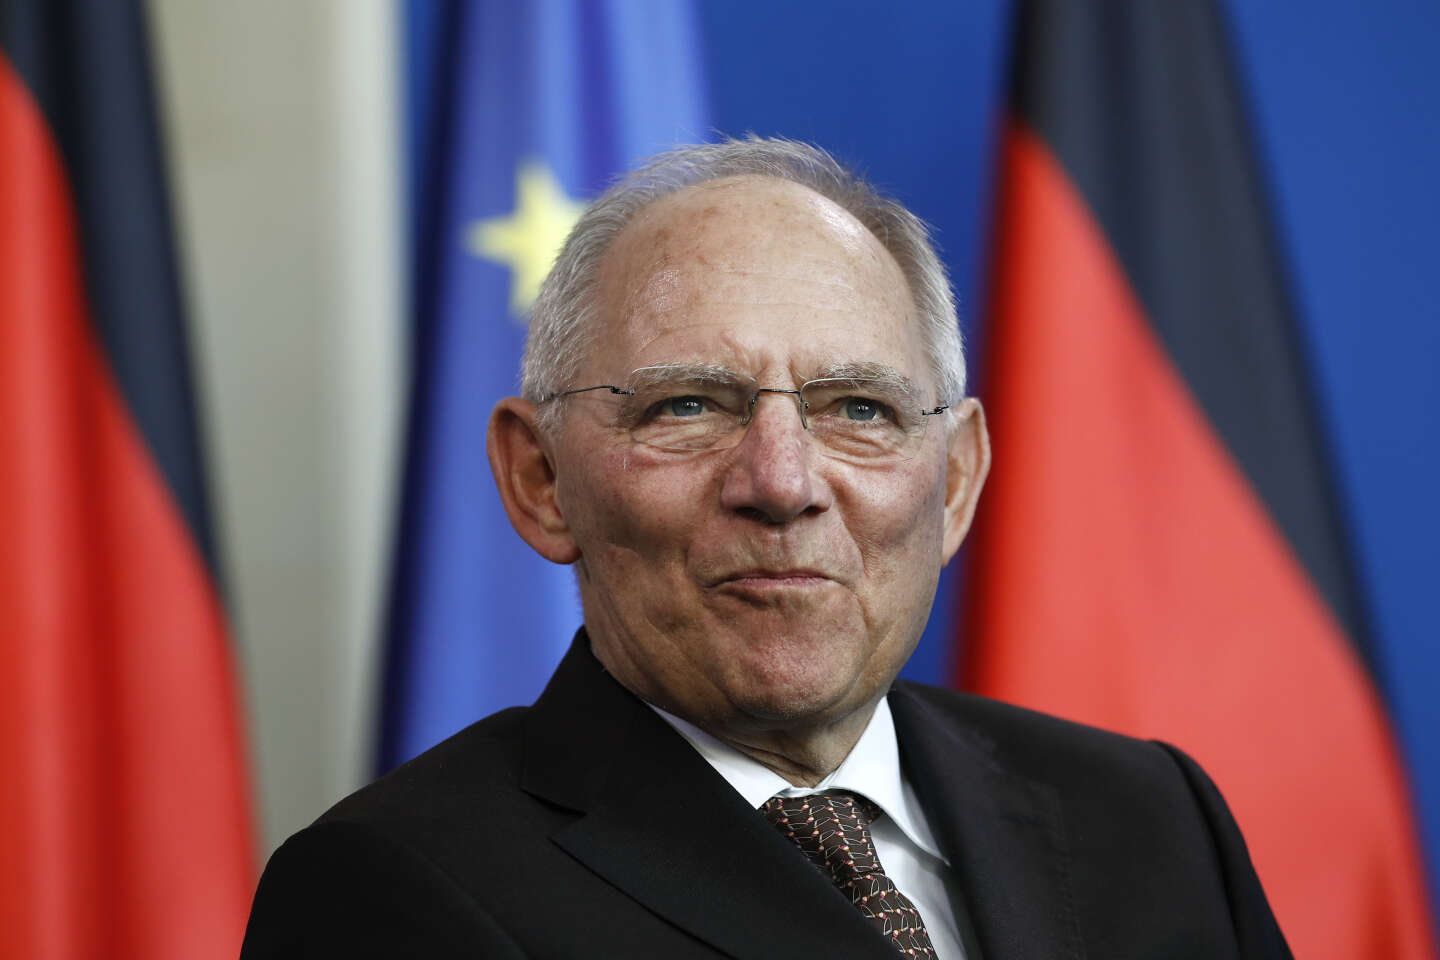 German Finance Minister and Bundestag President Wolfgang Schäuble has passed away.